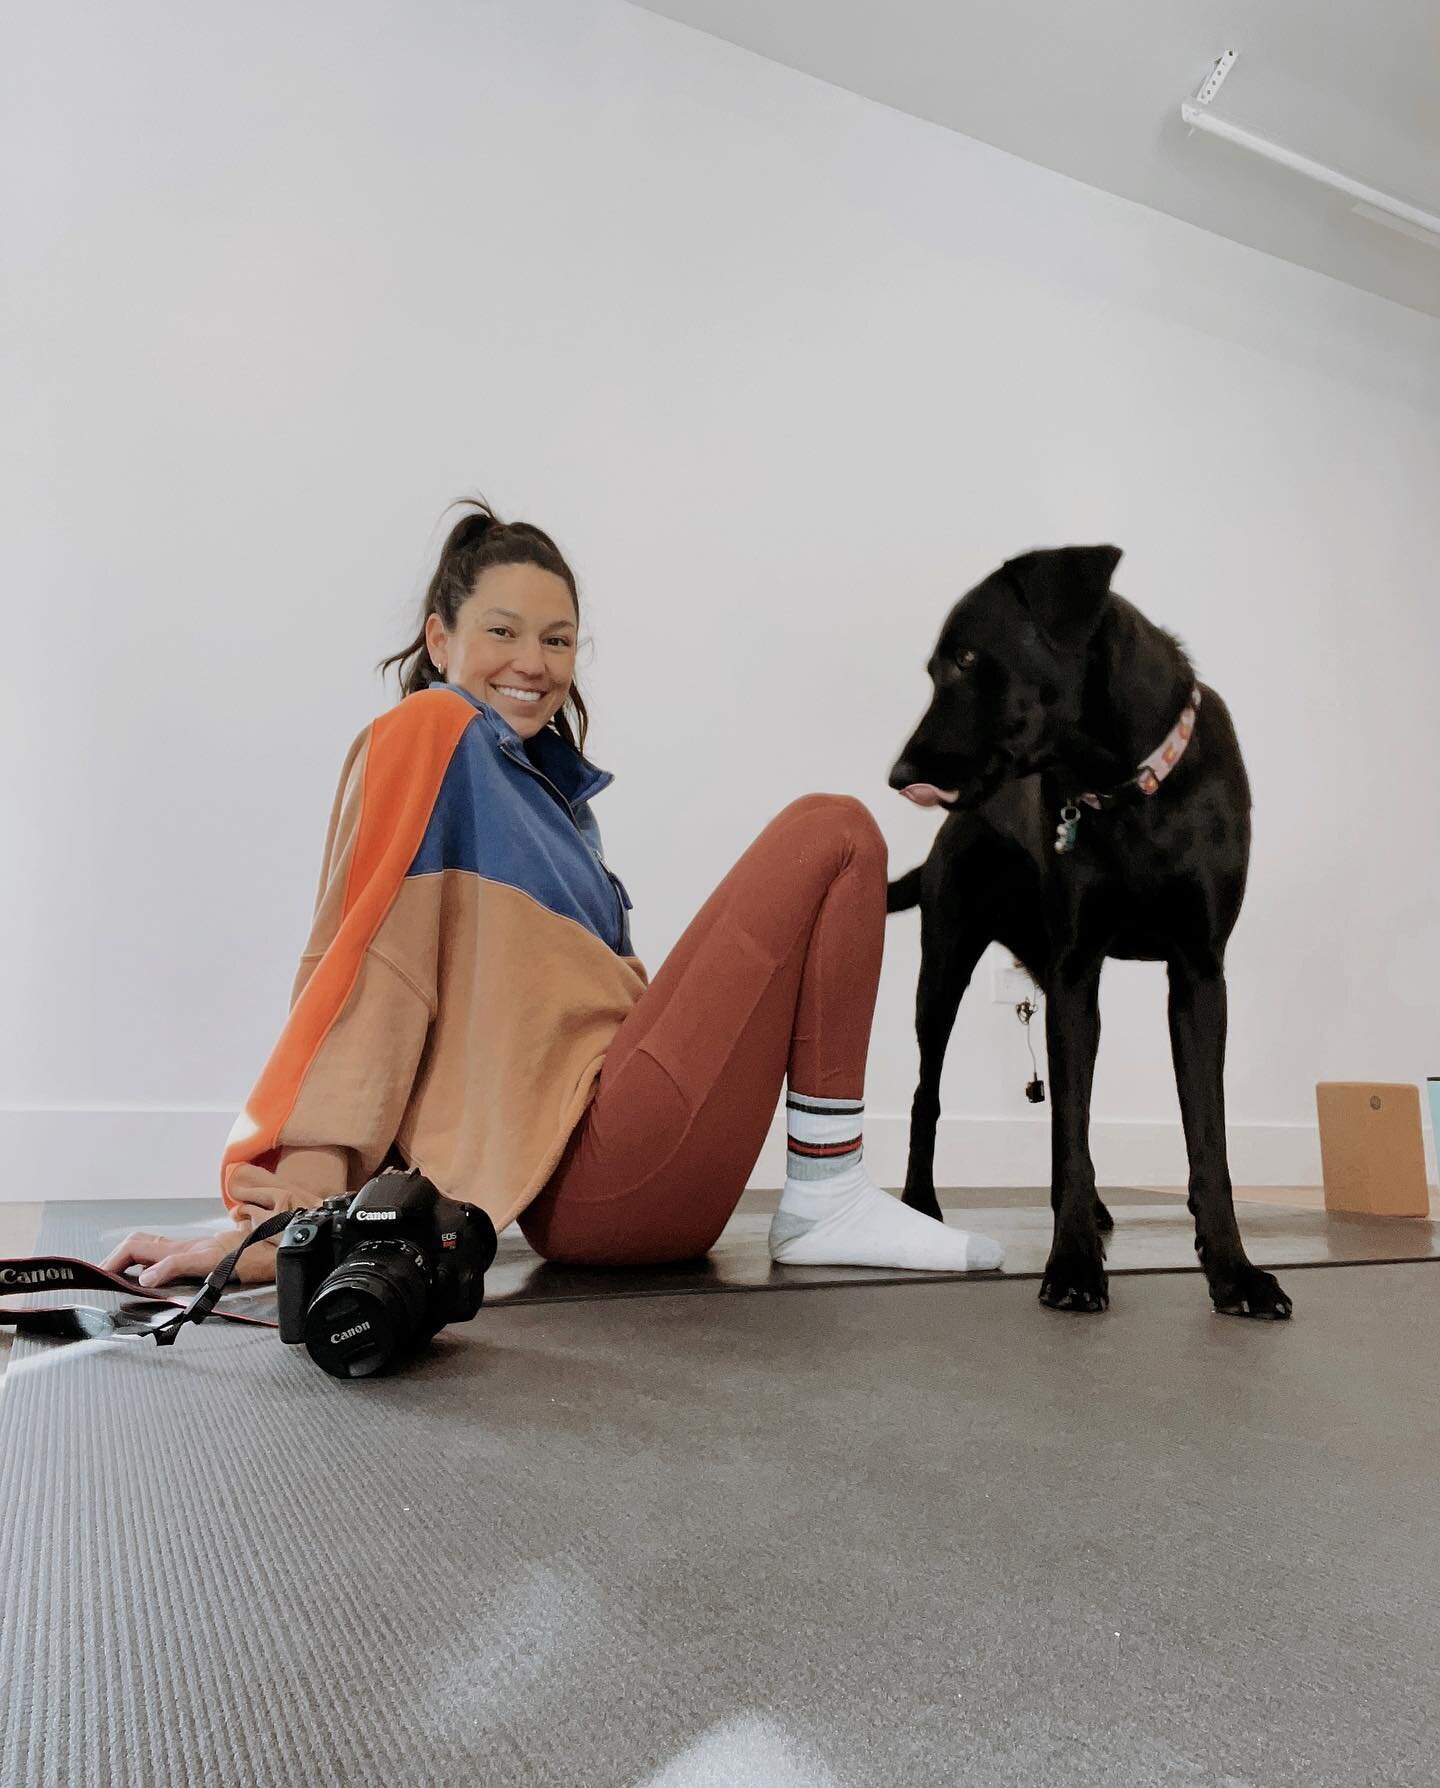 Things that light up my soul 
Capri ✨
Hubs &hearts;️
Pup kisses🐶
Filming yoga 🎥

Feeling grateful to be back on my mat this weekend. Practicing and filming classes for my community!

Stay tuned for new classes with @studio.mby @fpmovement @aubrewin